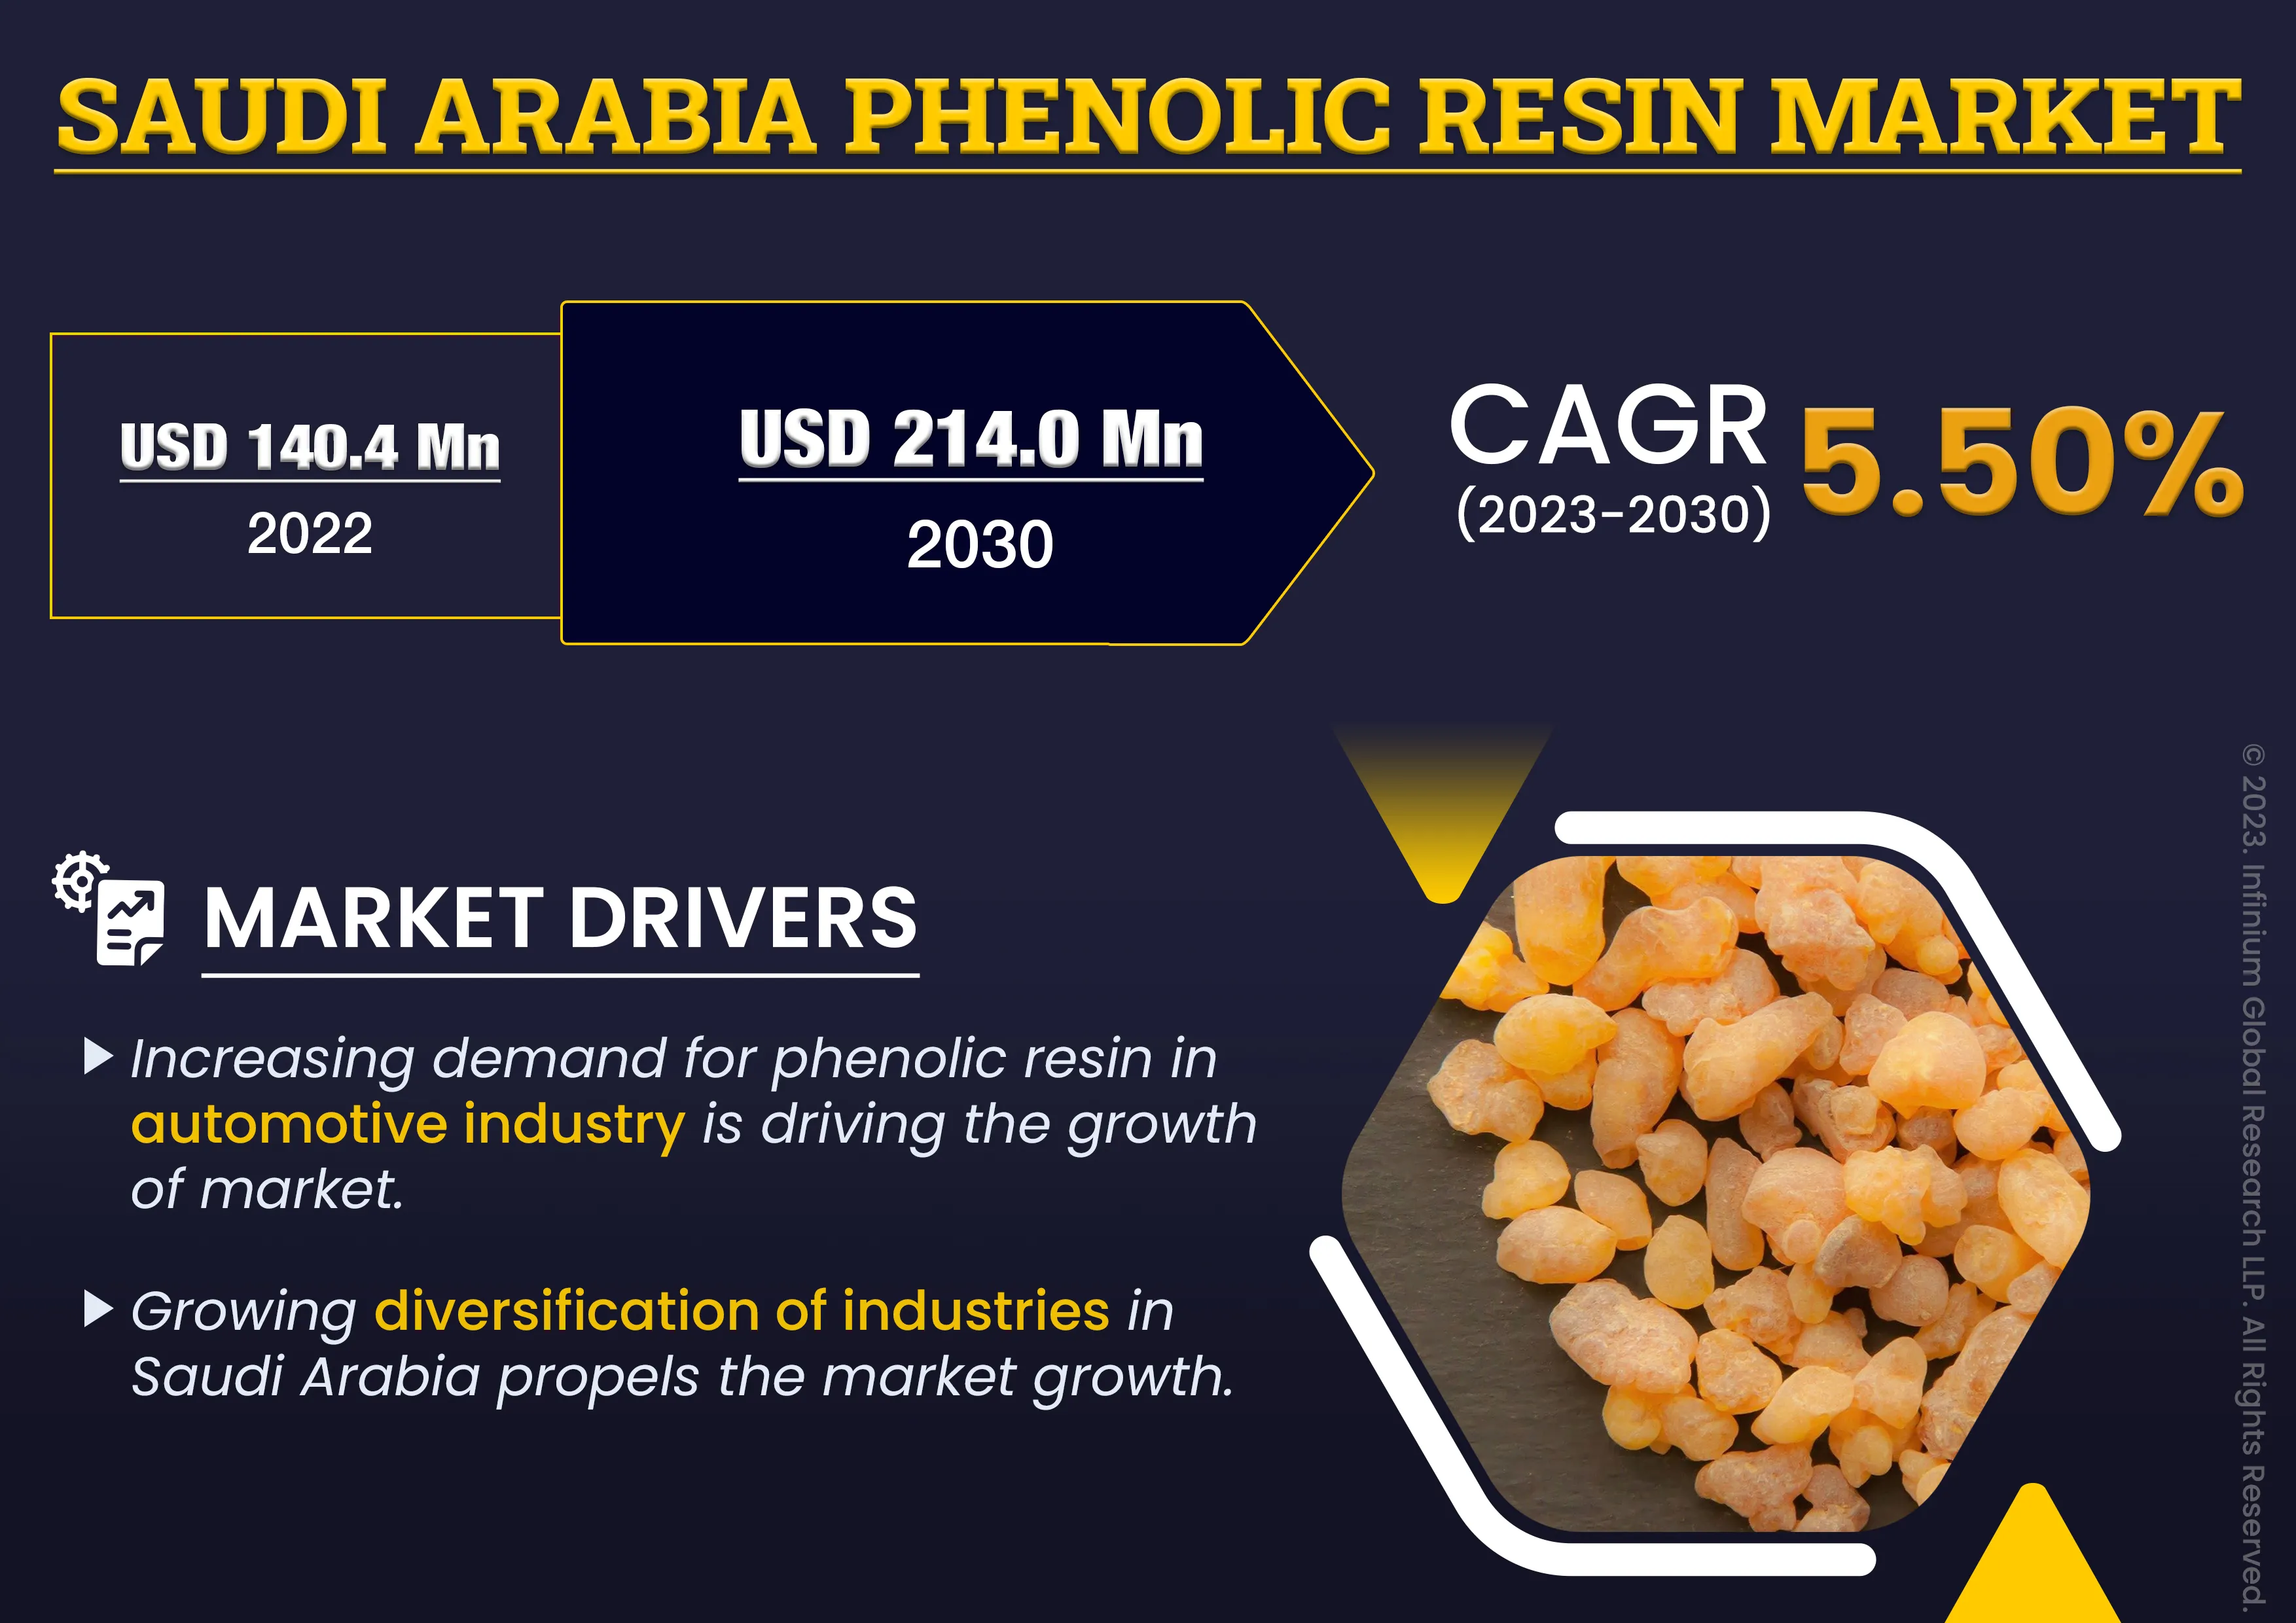 Saudi Arabia Phenolic Resin Market was Valued at USD 140.4 Million in 2022 and is Expected to Reach USD 214.0 Million by 2030 and Grow at a CAGR of 5.50% Over the Forecast Period.